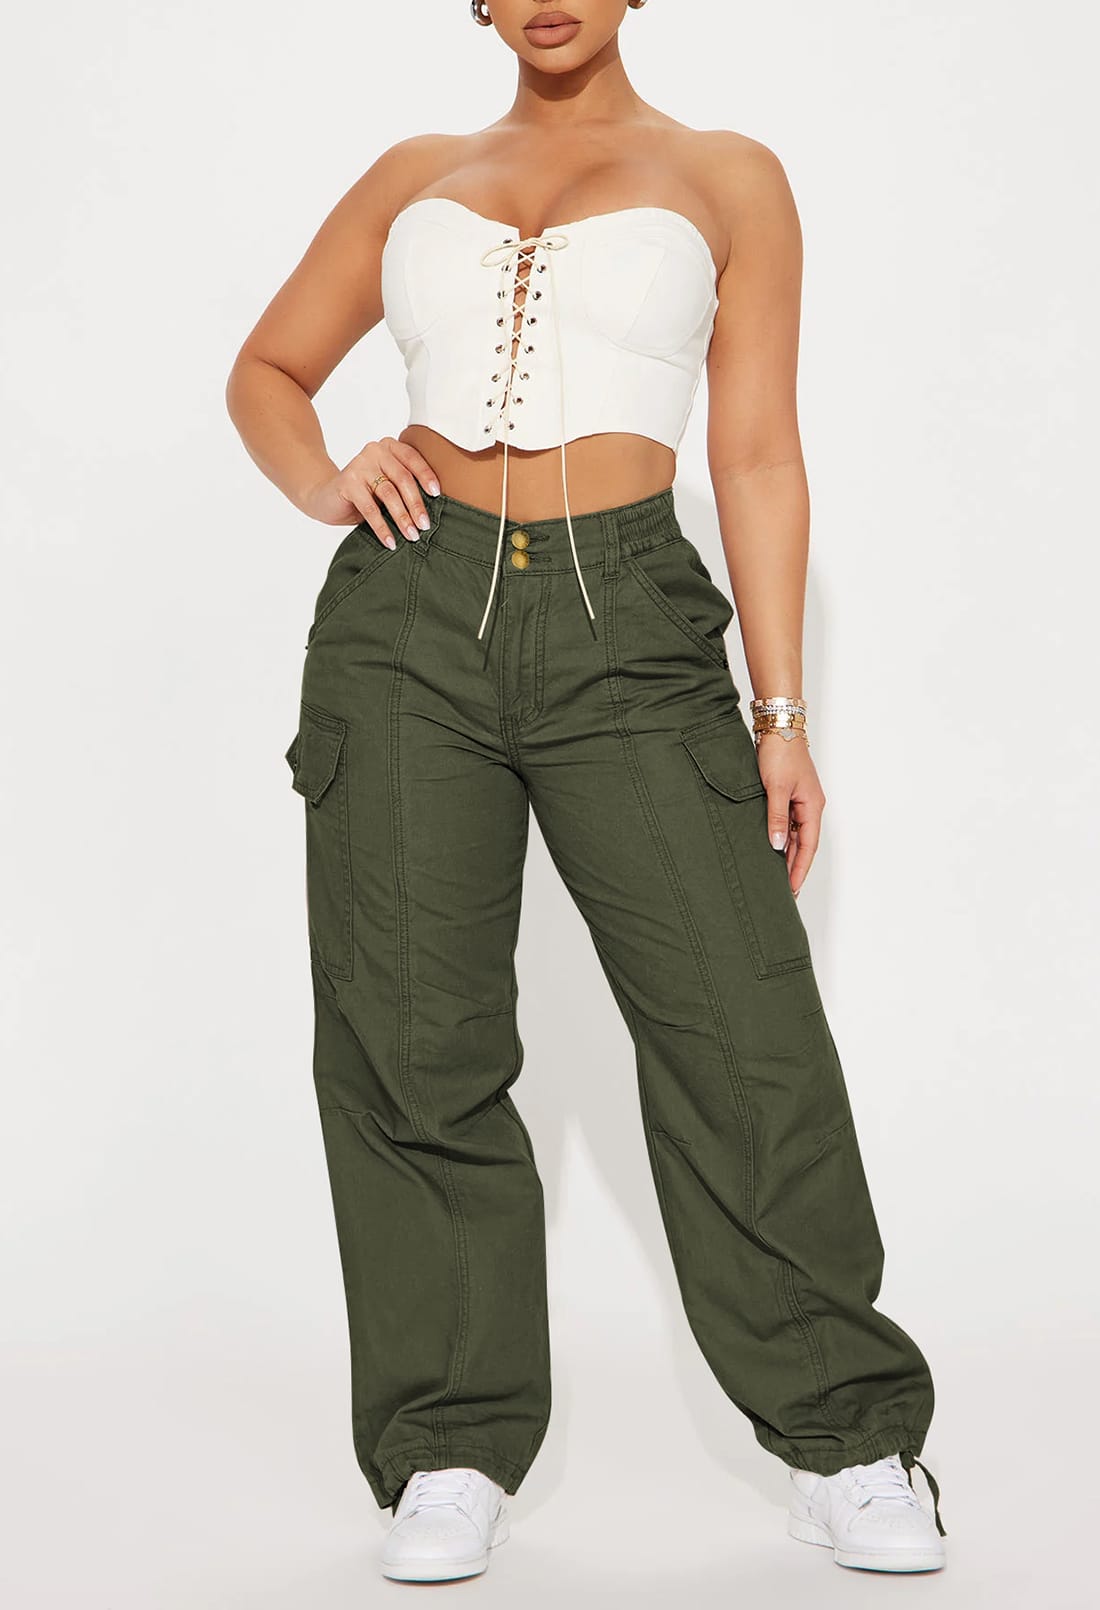 LC7712377-109-S, LC7712377-109-M, LC7712377-109-L, LC7712377-109-XL, Army Green Cargo Pant